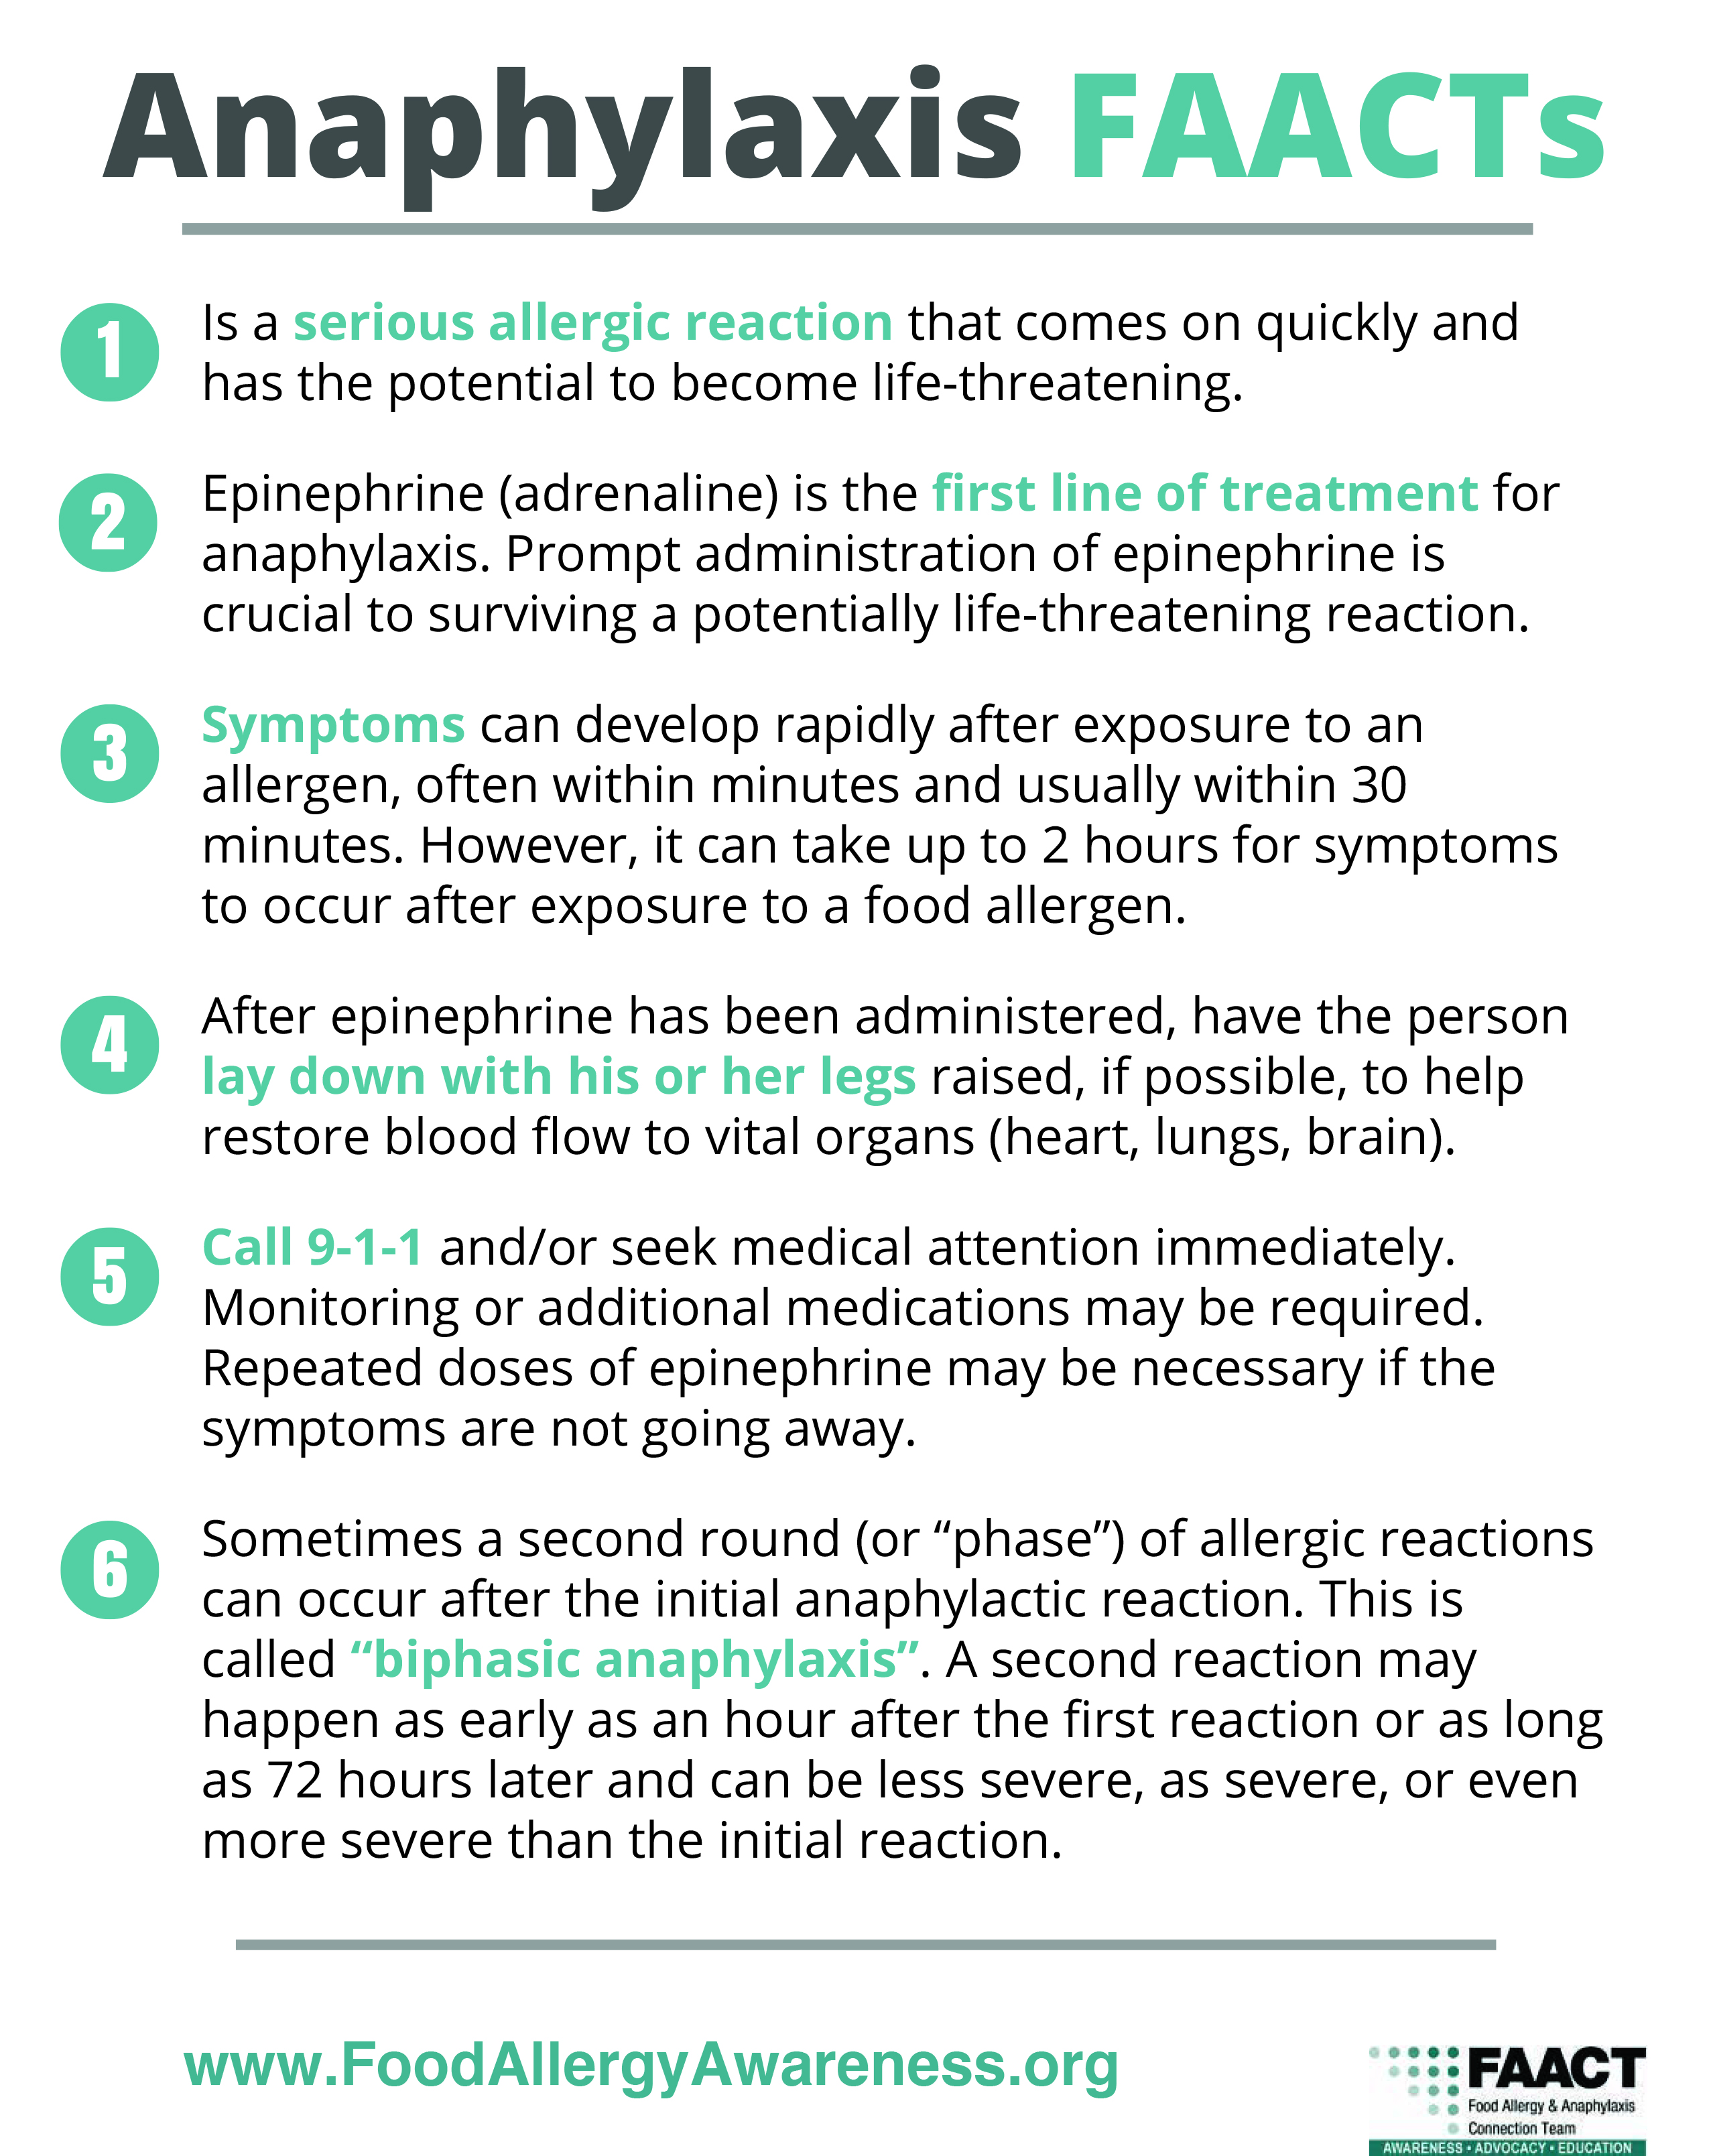 Anaphylaxis FAACTs